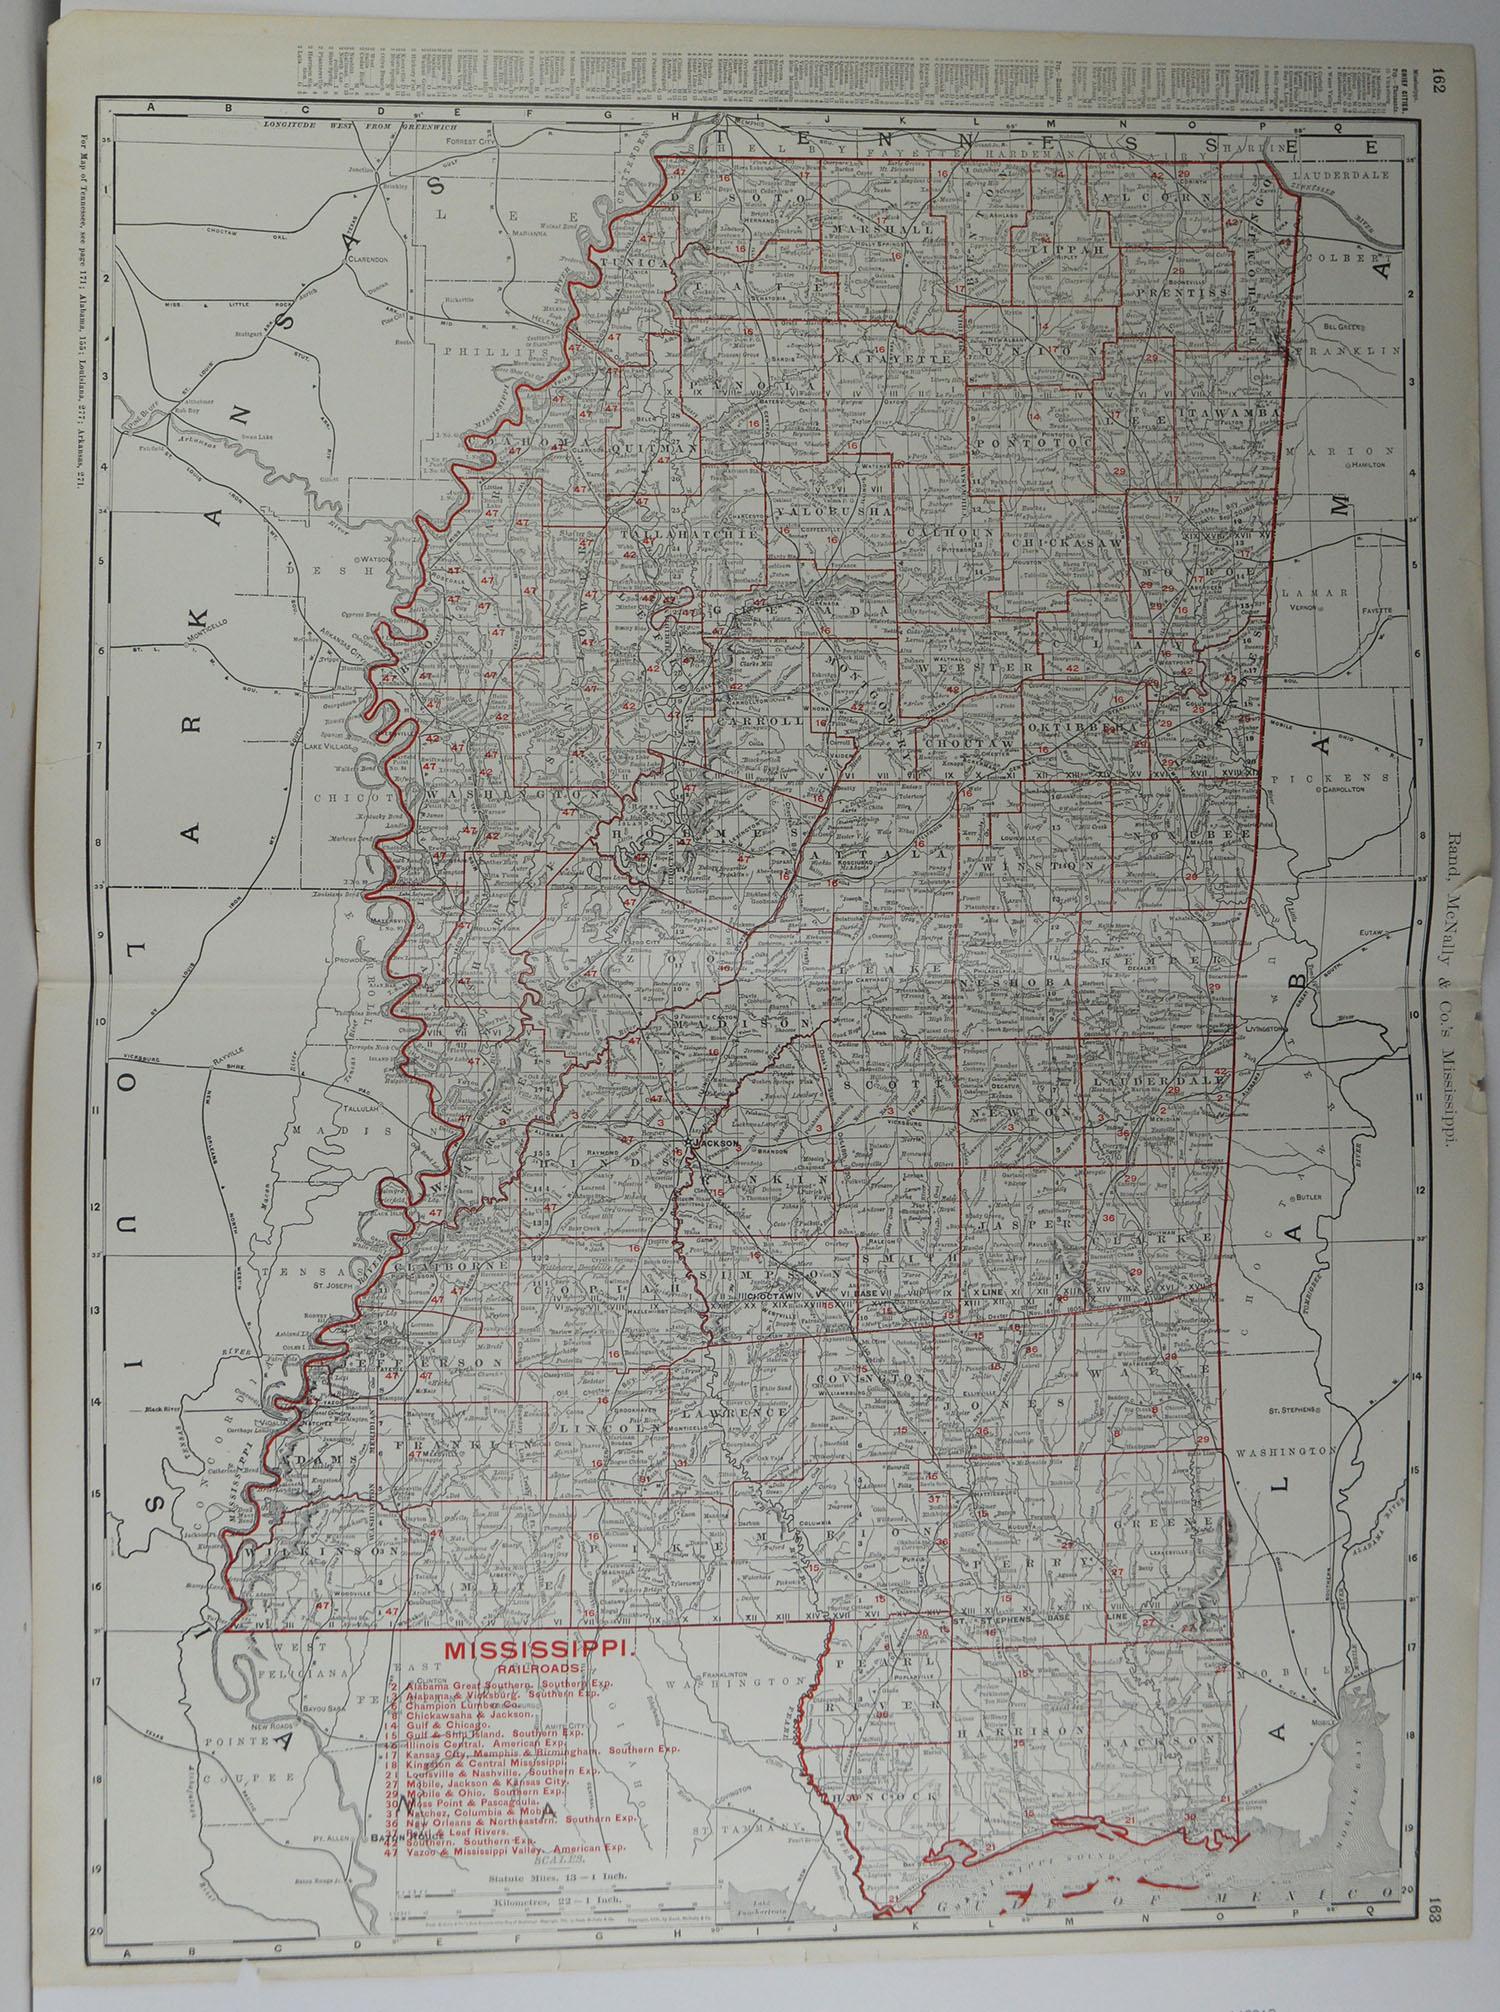 Fabulous monochrome map with red outline color 

Original color

By Rand, McNally & Co.

Published circa 1900

Unframed

Repairs to minor edge tears.